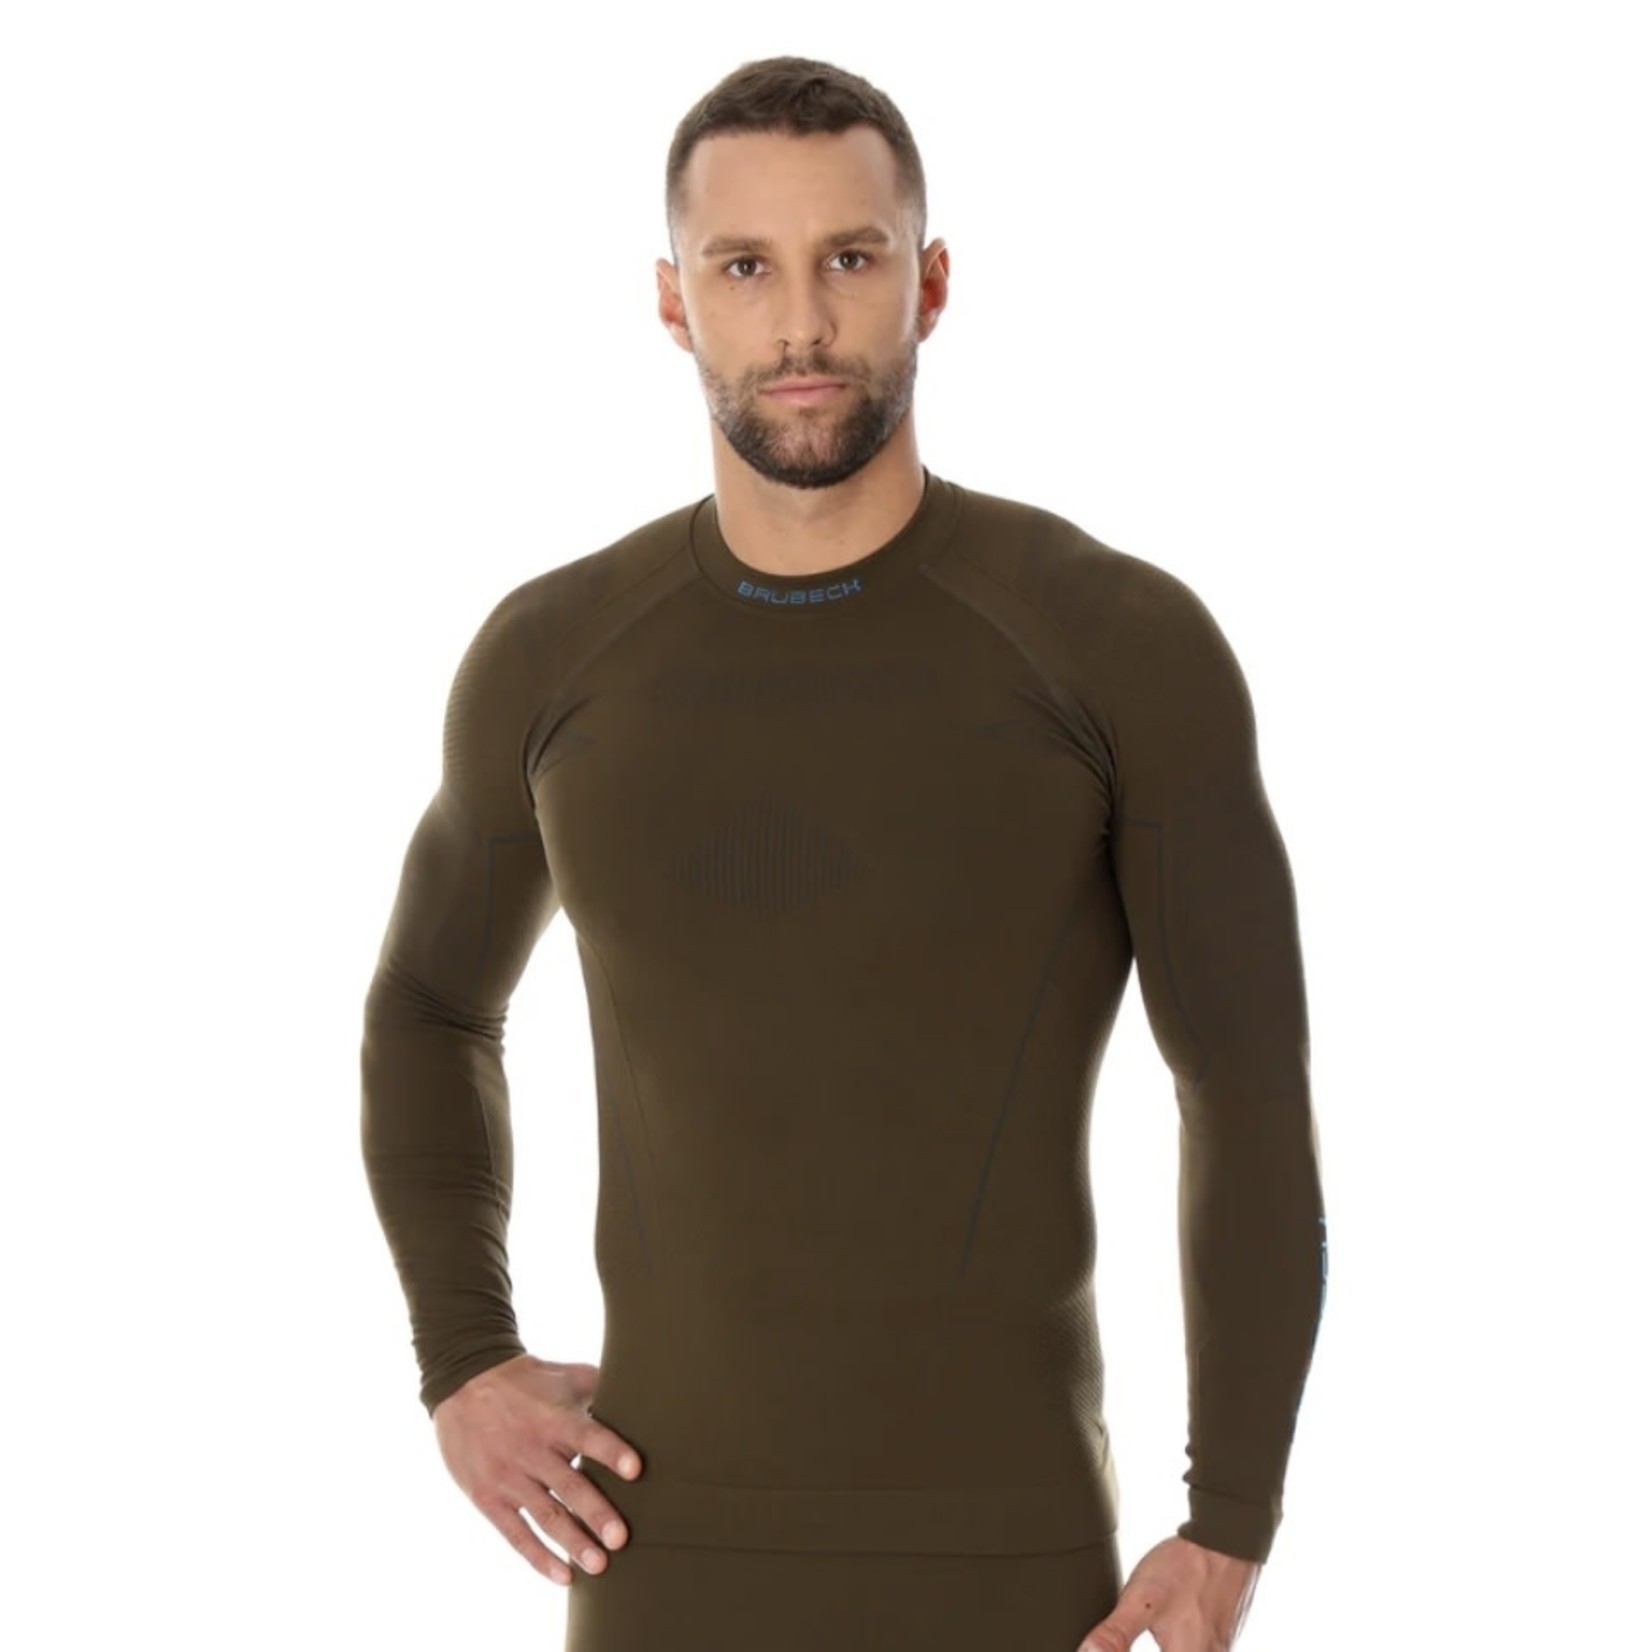 Brubeck Body Guard Brubeck Thermo Long Sleeve, Men's